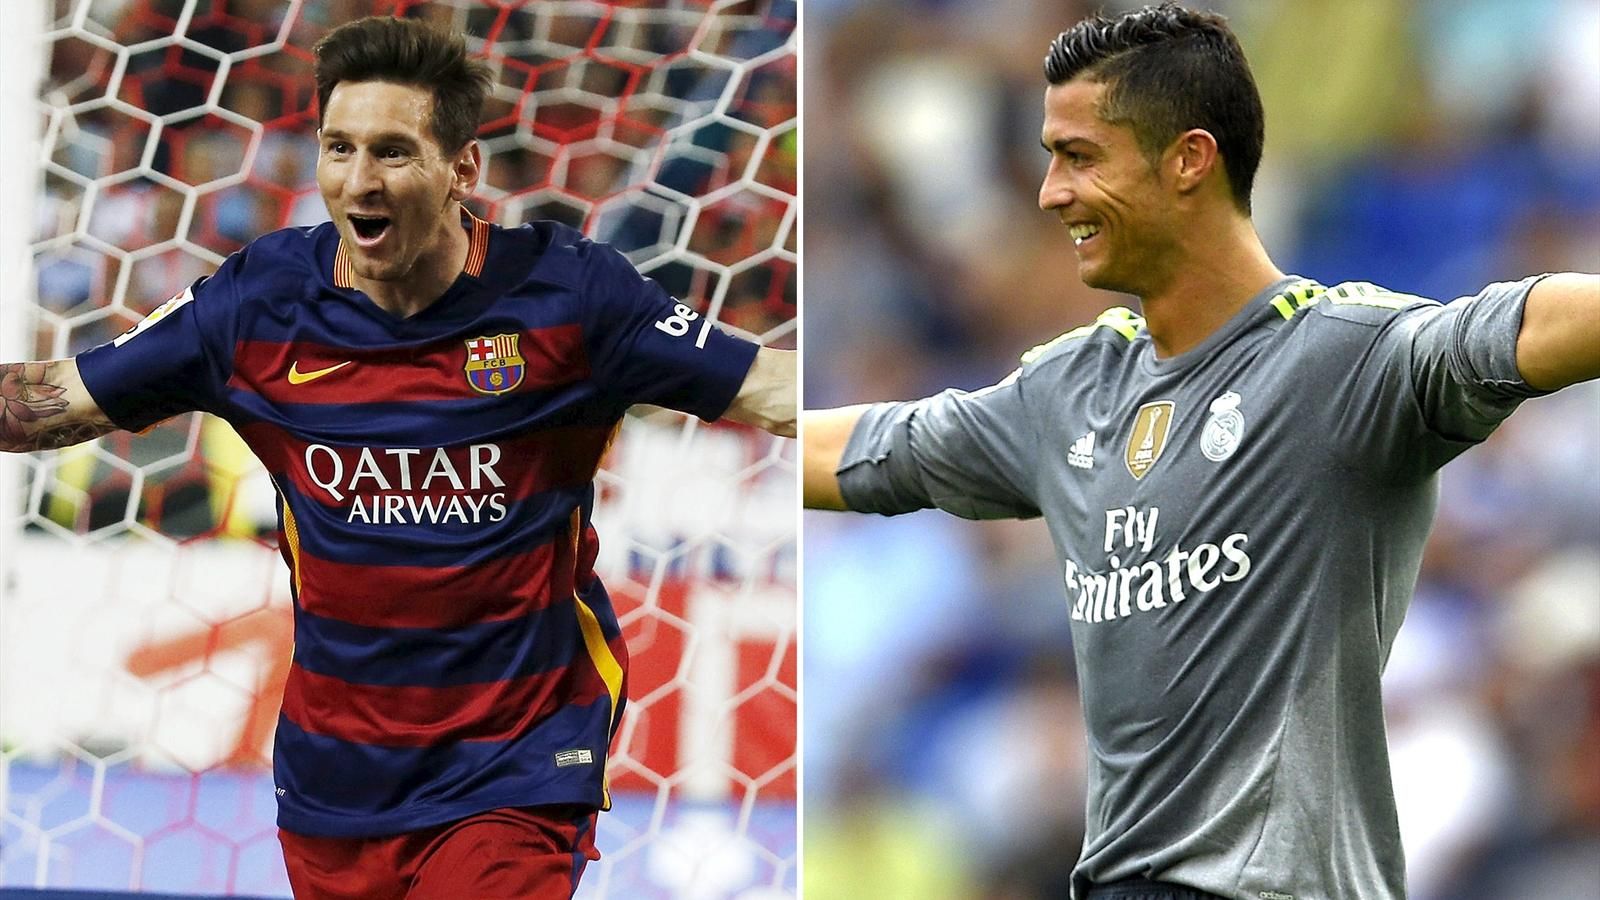 Lionel Messi V Cristiano Ronaldo Who Is The Greatest This